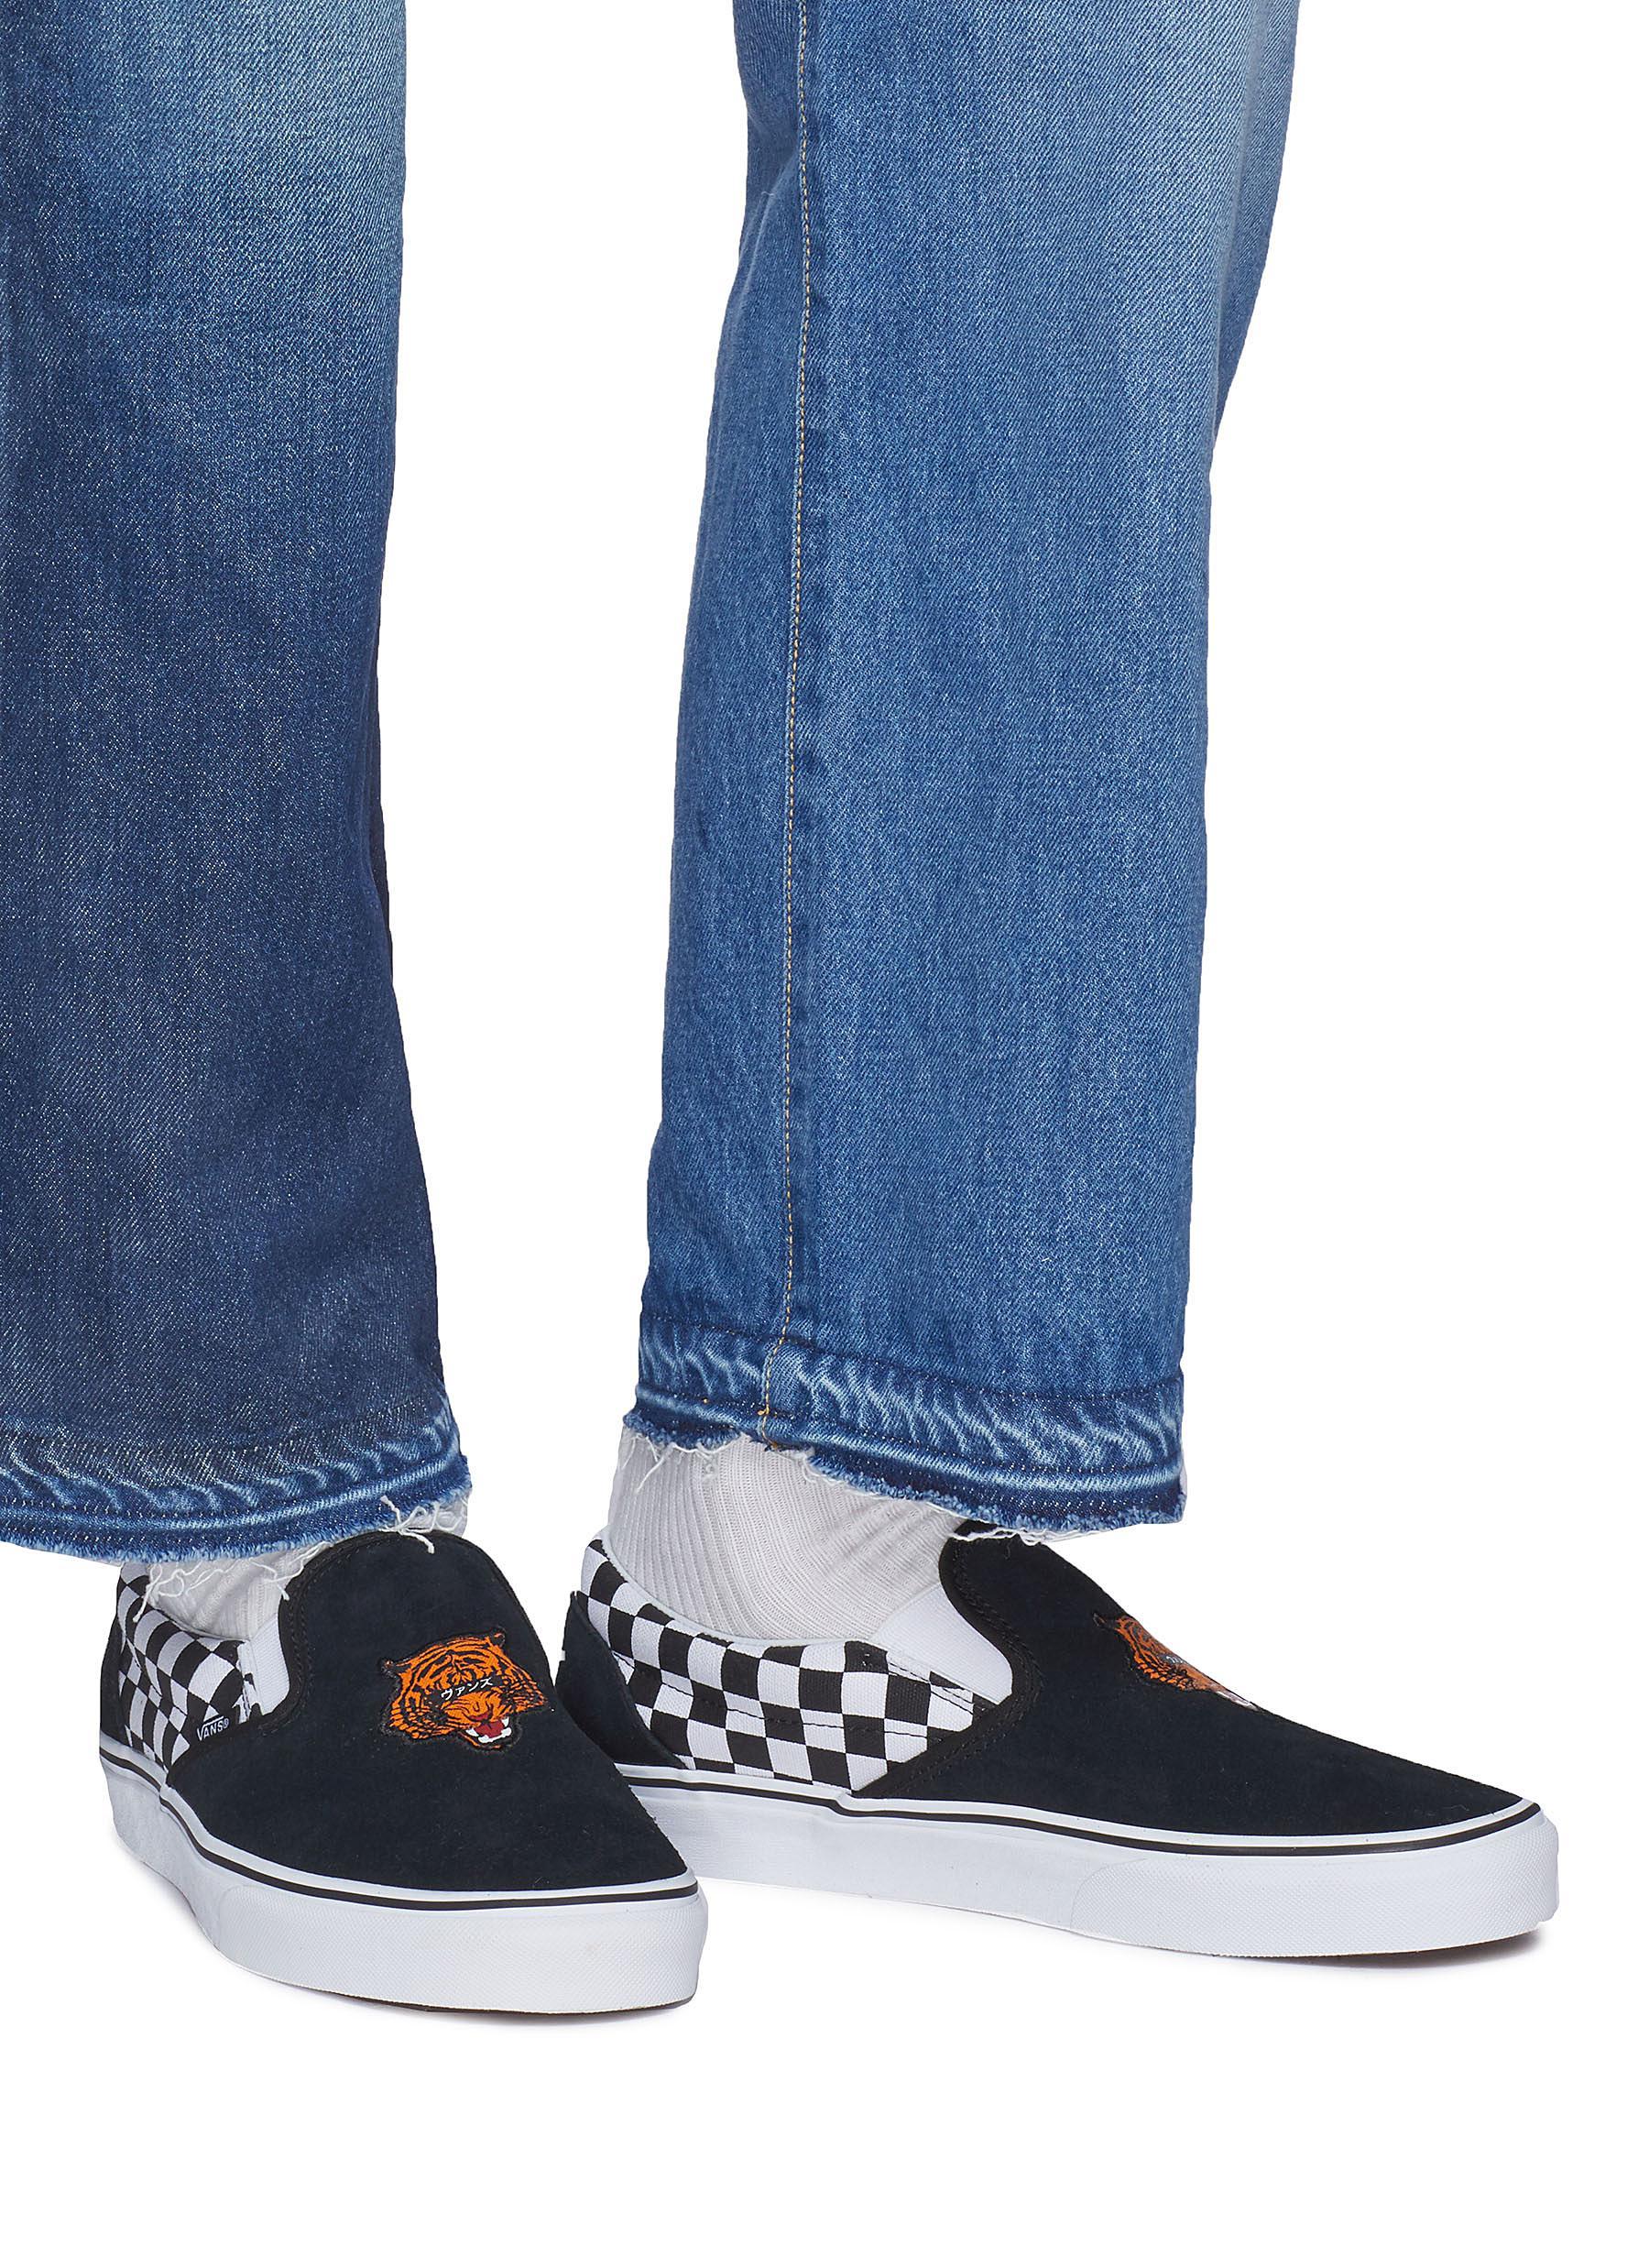 Vans 'classic Slip-on' Tiger Embroidered Checkerboard Panel Suede Skates in  Blue for Men - Lyst